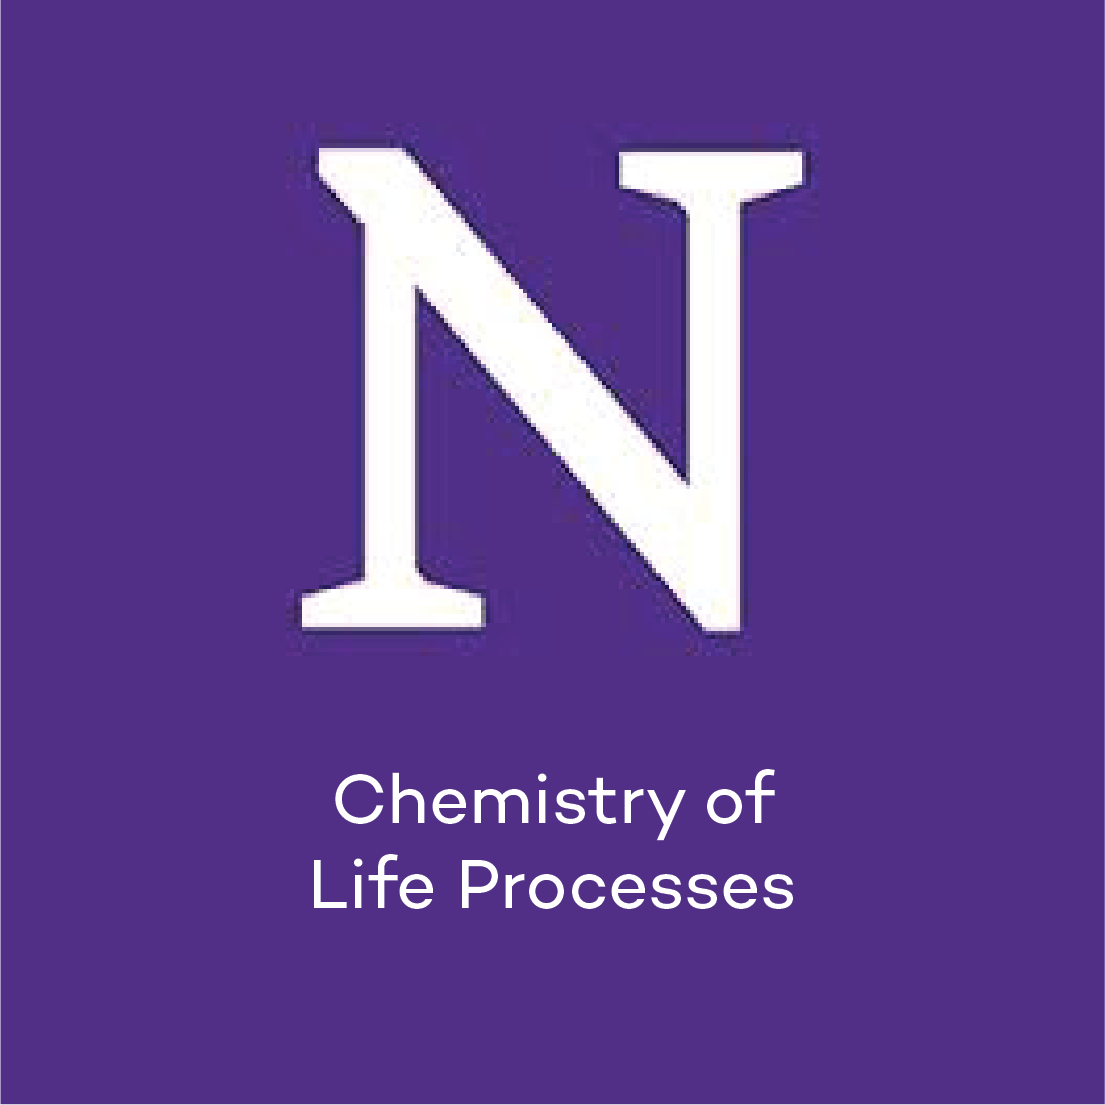 Chemistry of Life Processes Institute